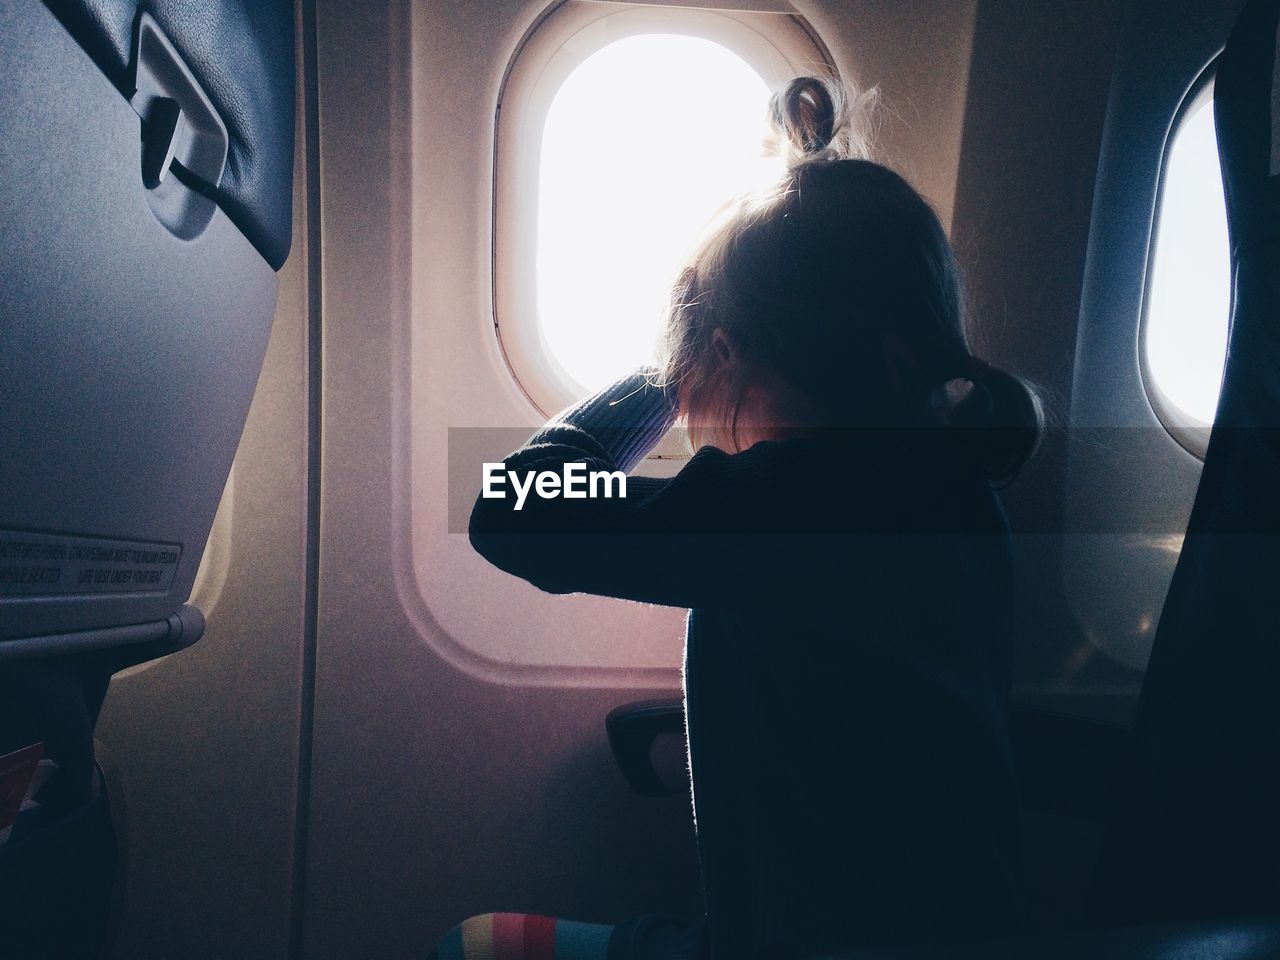 Girl sitting in airplane